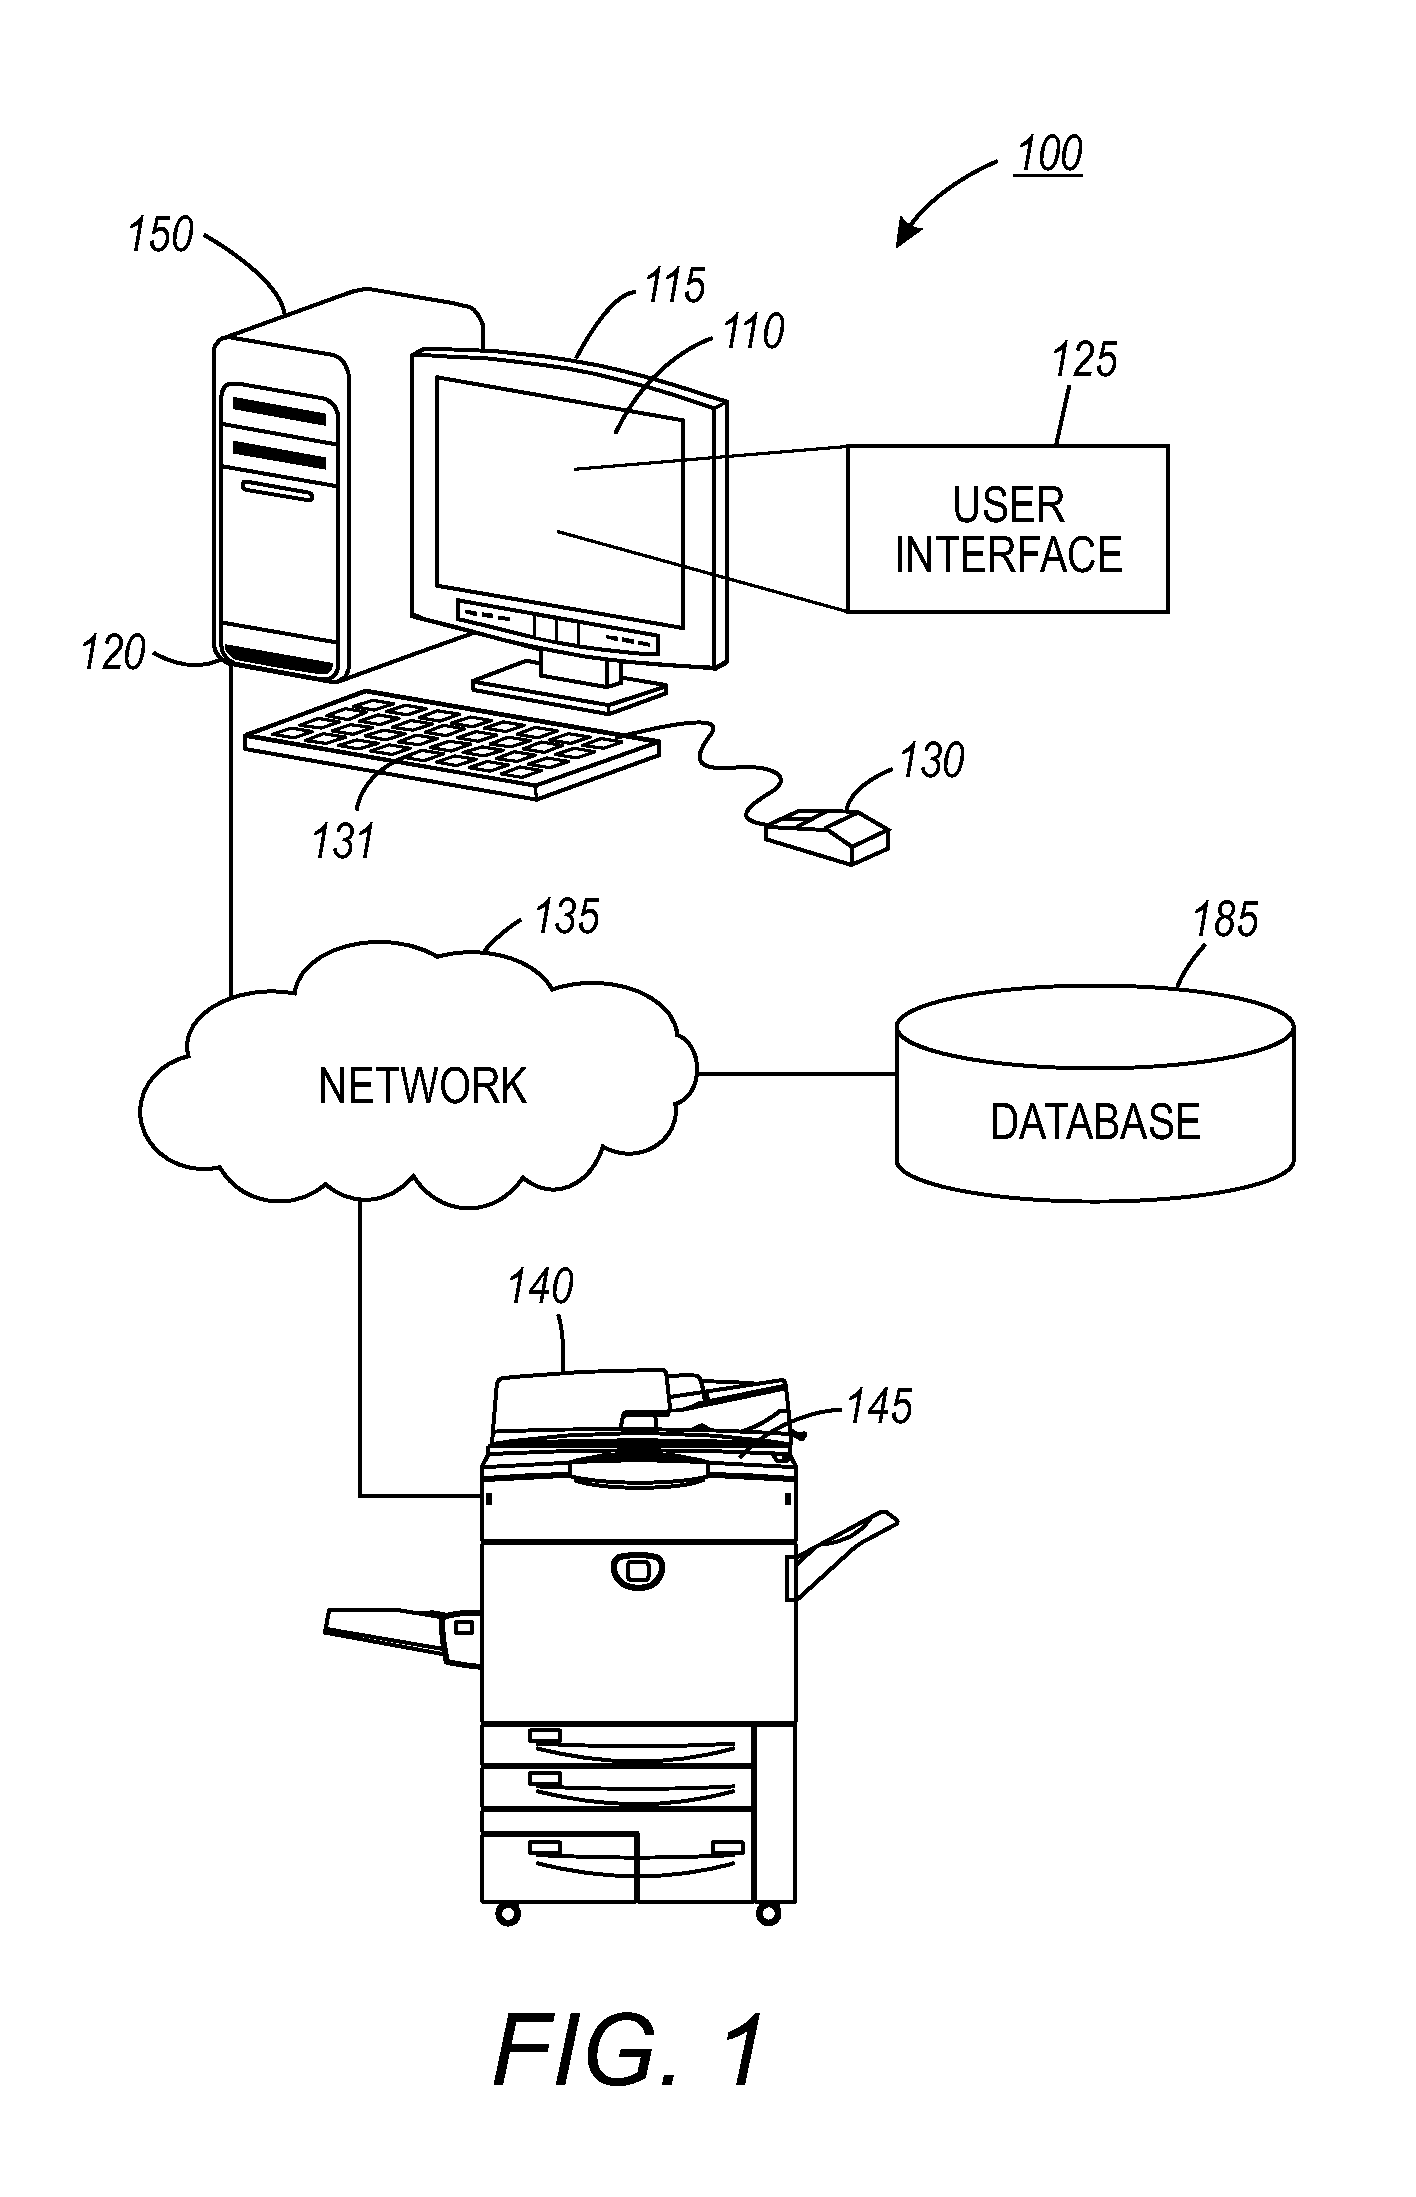 Remote diagnostic system and method based on device data classification